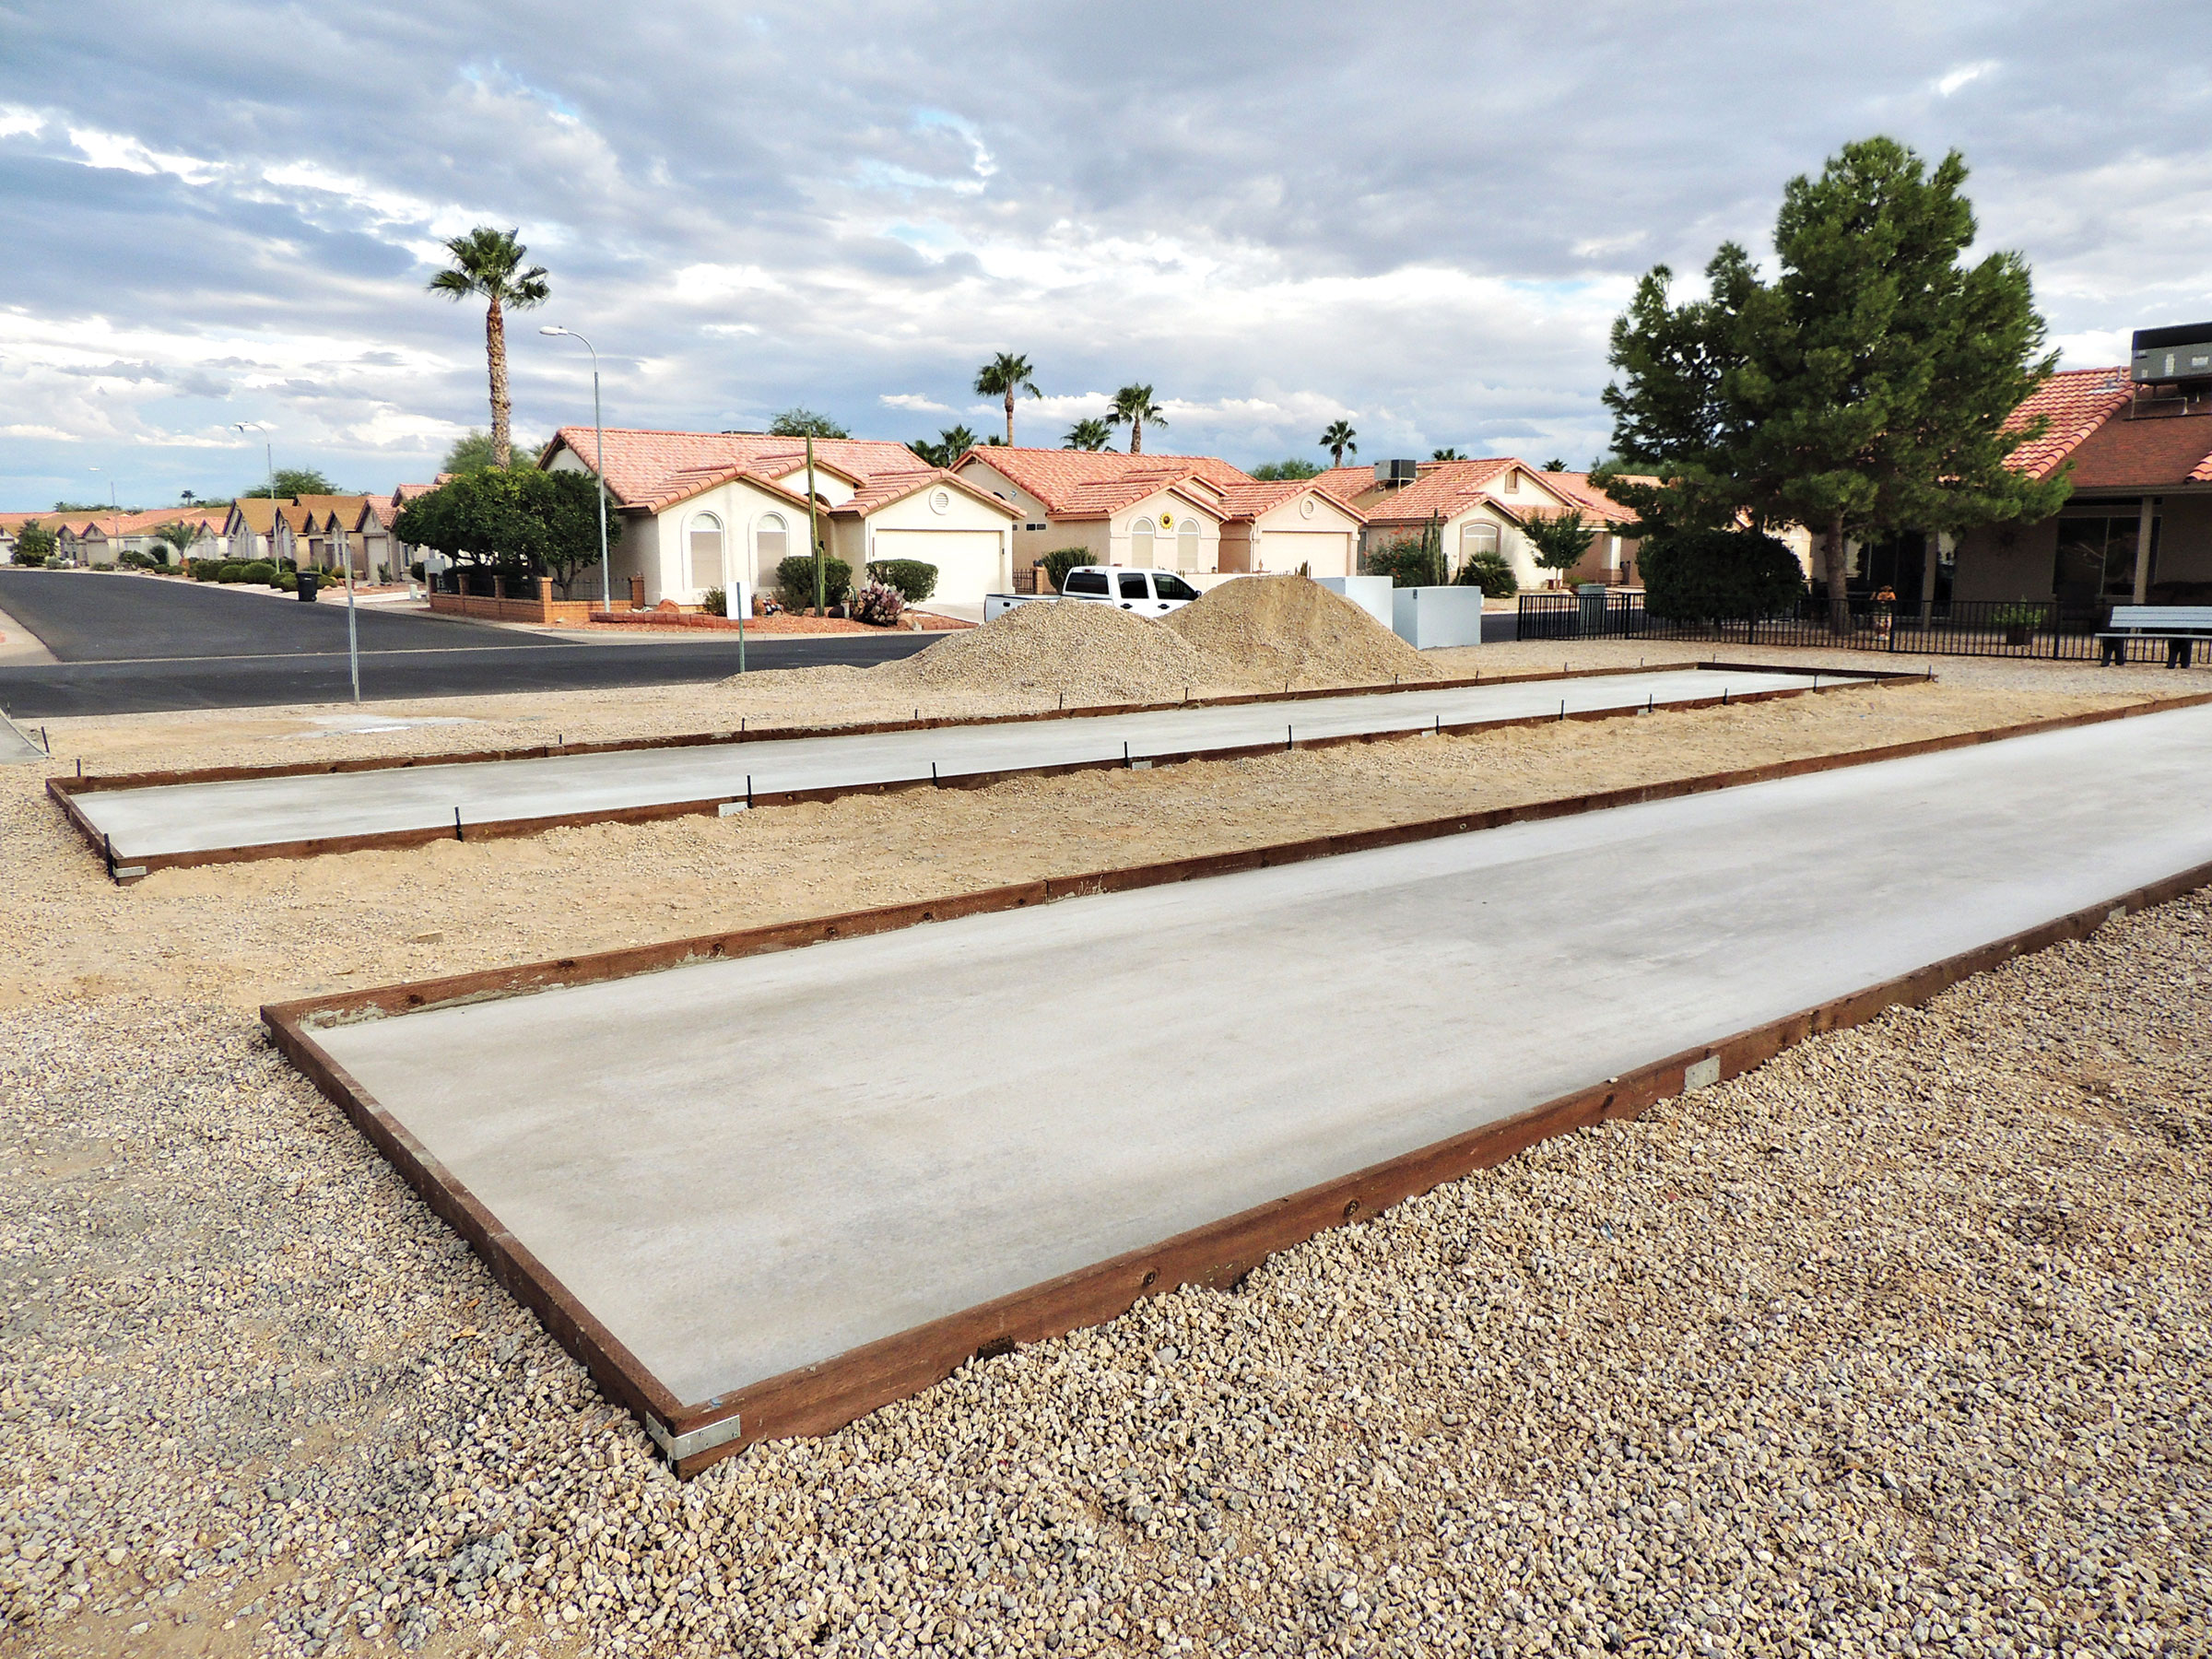 Give the new bocce ball courts a try!